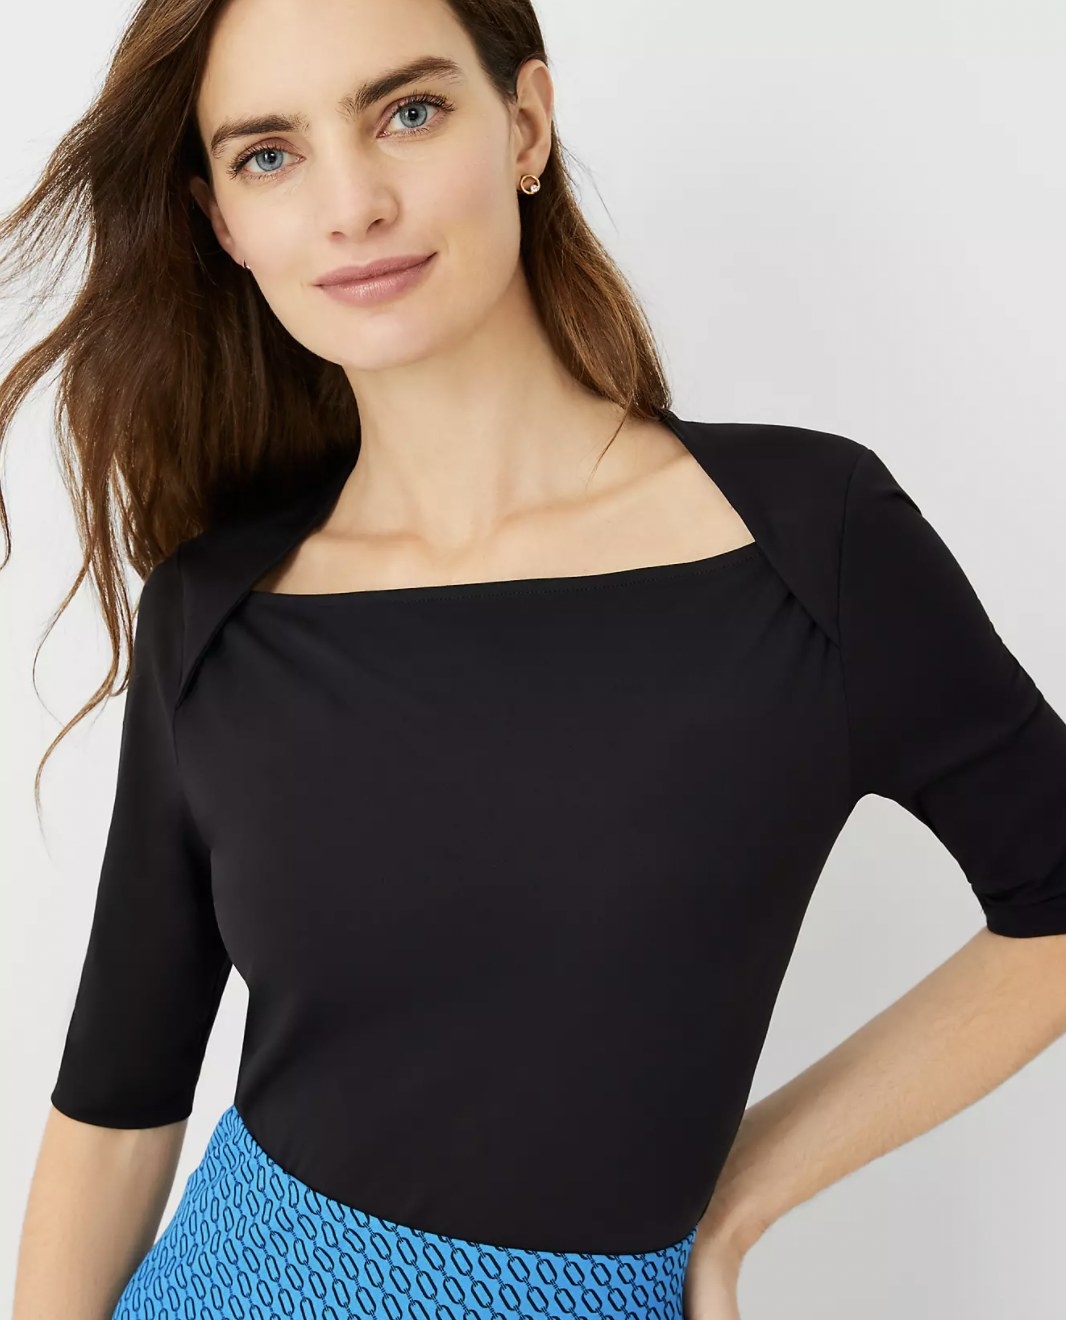 Model wearing the black top with skirt